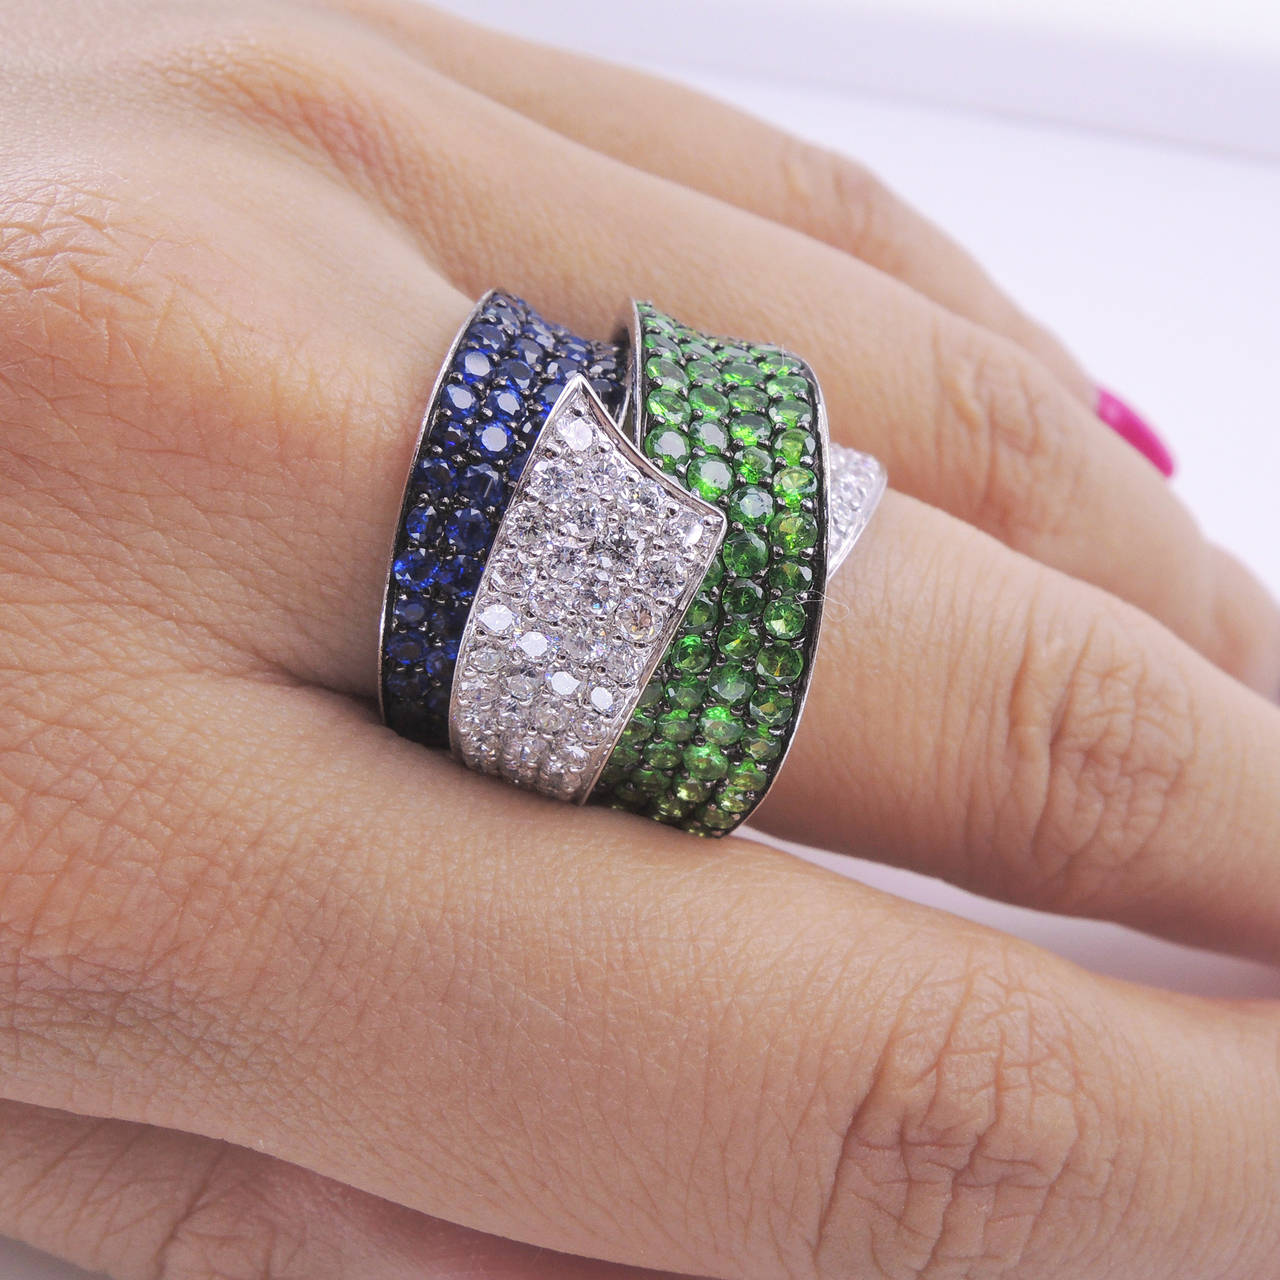 Stunning Diamond Tsavorite Sapphire Band Ring features an Intertwined design composed of 84 pave-set brilliant-cut diamonds=1.57ct, 63 sapphires=1.71ct and 84 tsavorite-1.99ct set in 18k white gold; Ring size 7; weight=18.02gm. Step out in Style and